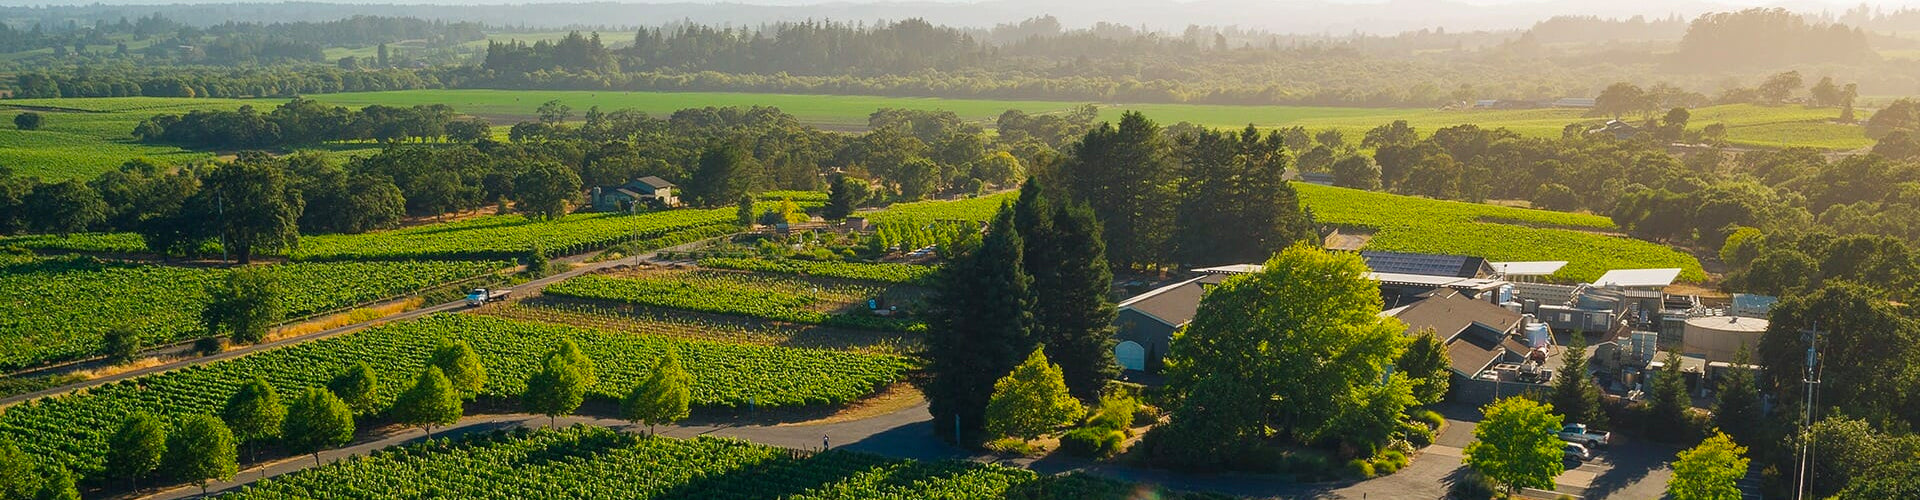 Arial shot of De Loach Winery & Vineyards in Sonoma County